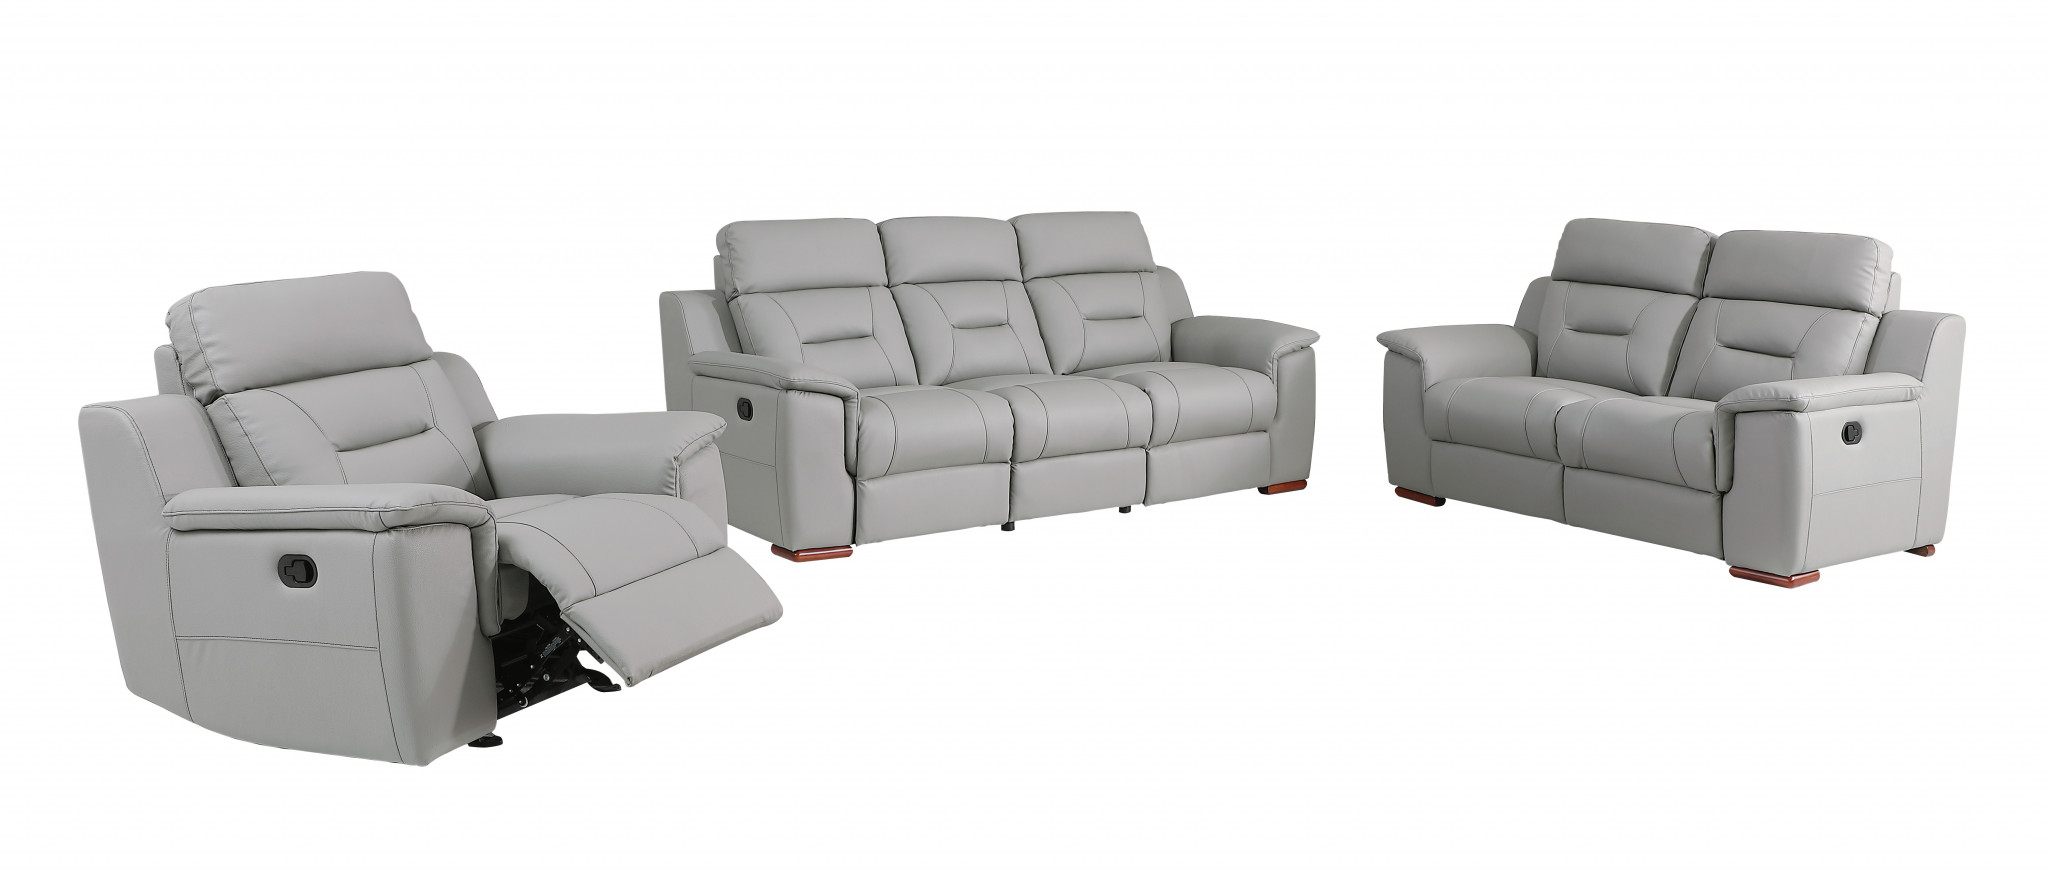 Three Piece Indoor Gray Genuine Leather Five Person Seating Set-366195-1